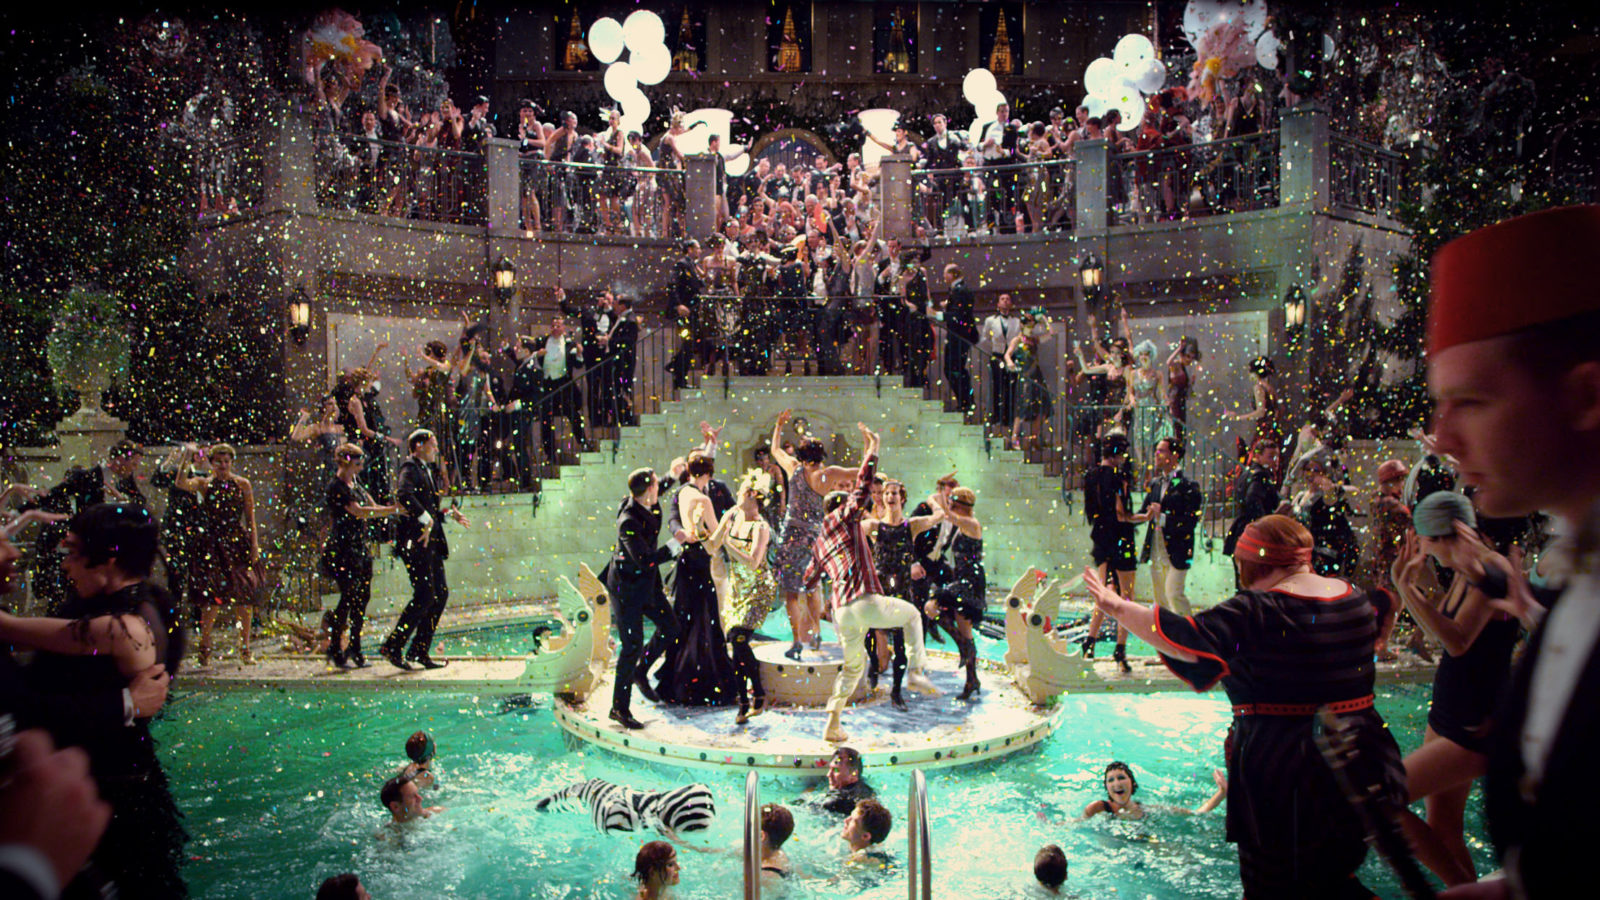 Great Gatsby Party-Roaring 20s. #Gatsby #roaring20s #party